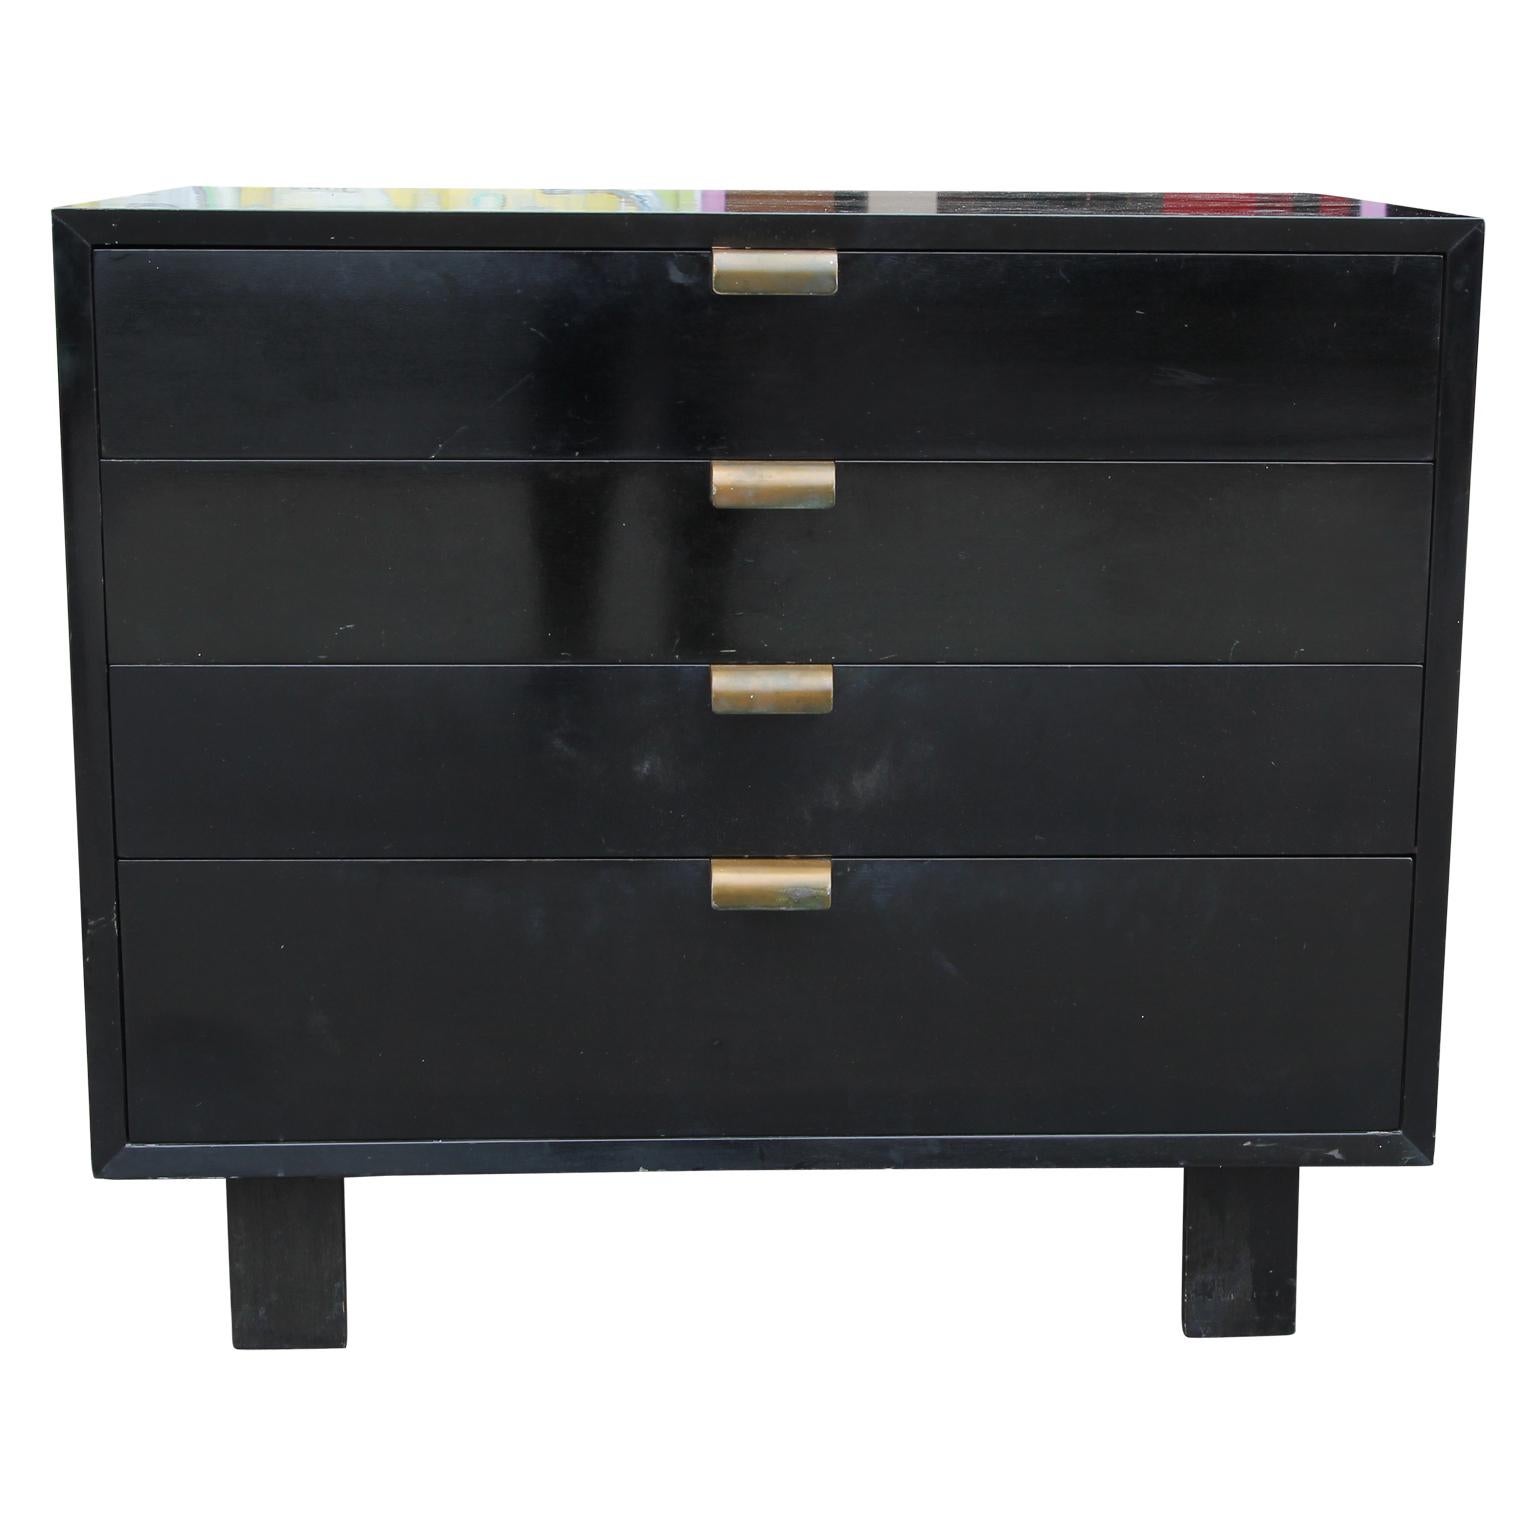 Pair of 1950s Herman Miller black finished dressers designed by George Nelson. Each drawer has brass color handles and the bottom drawer has wooden dividers. The dressers are sold as is. Consult condition report for details.